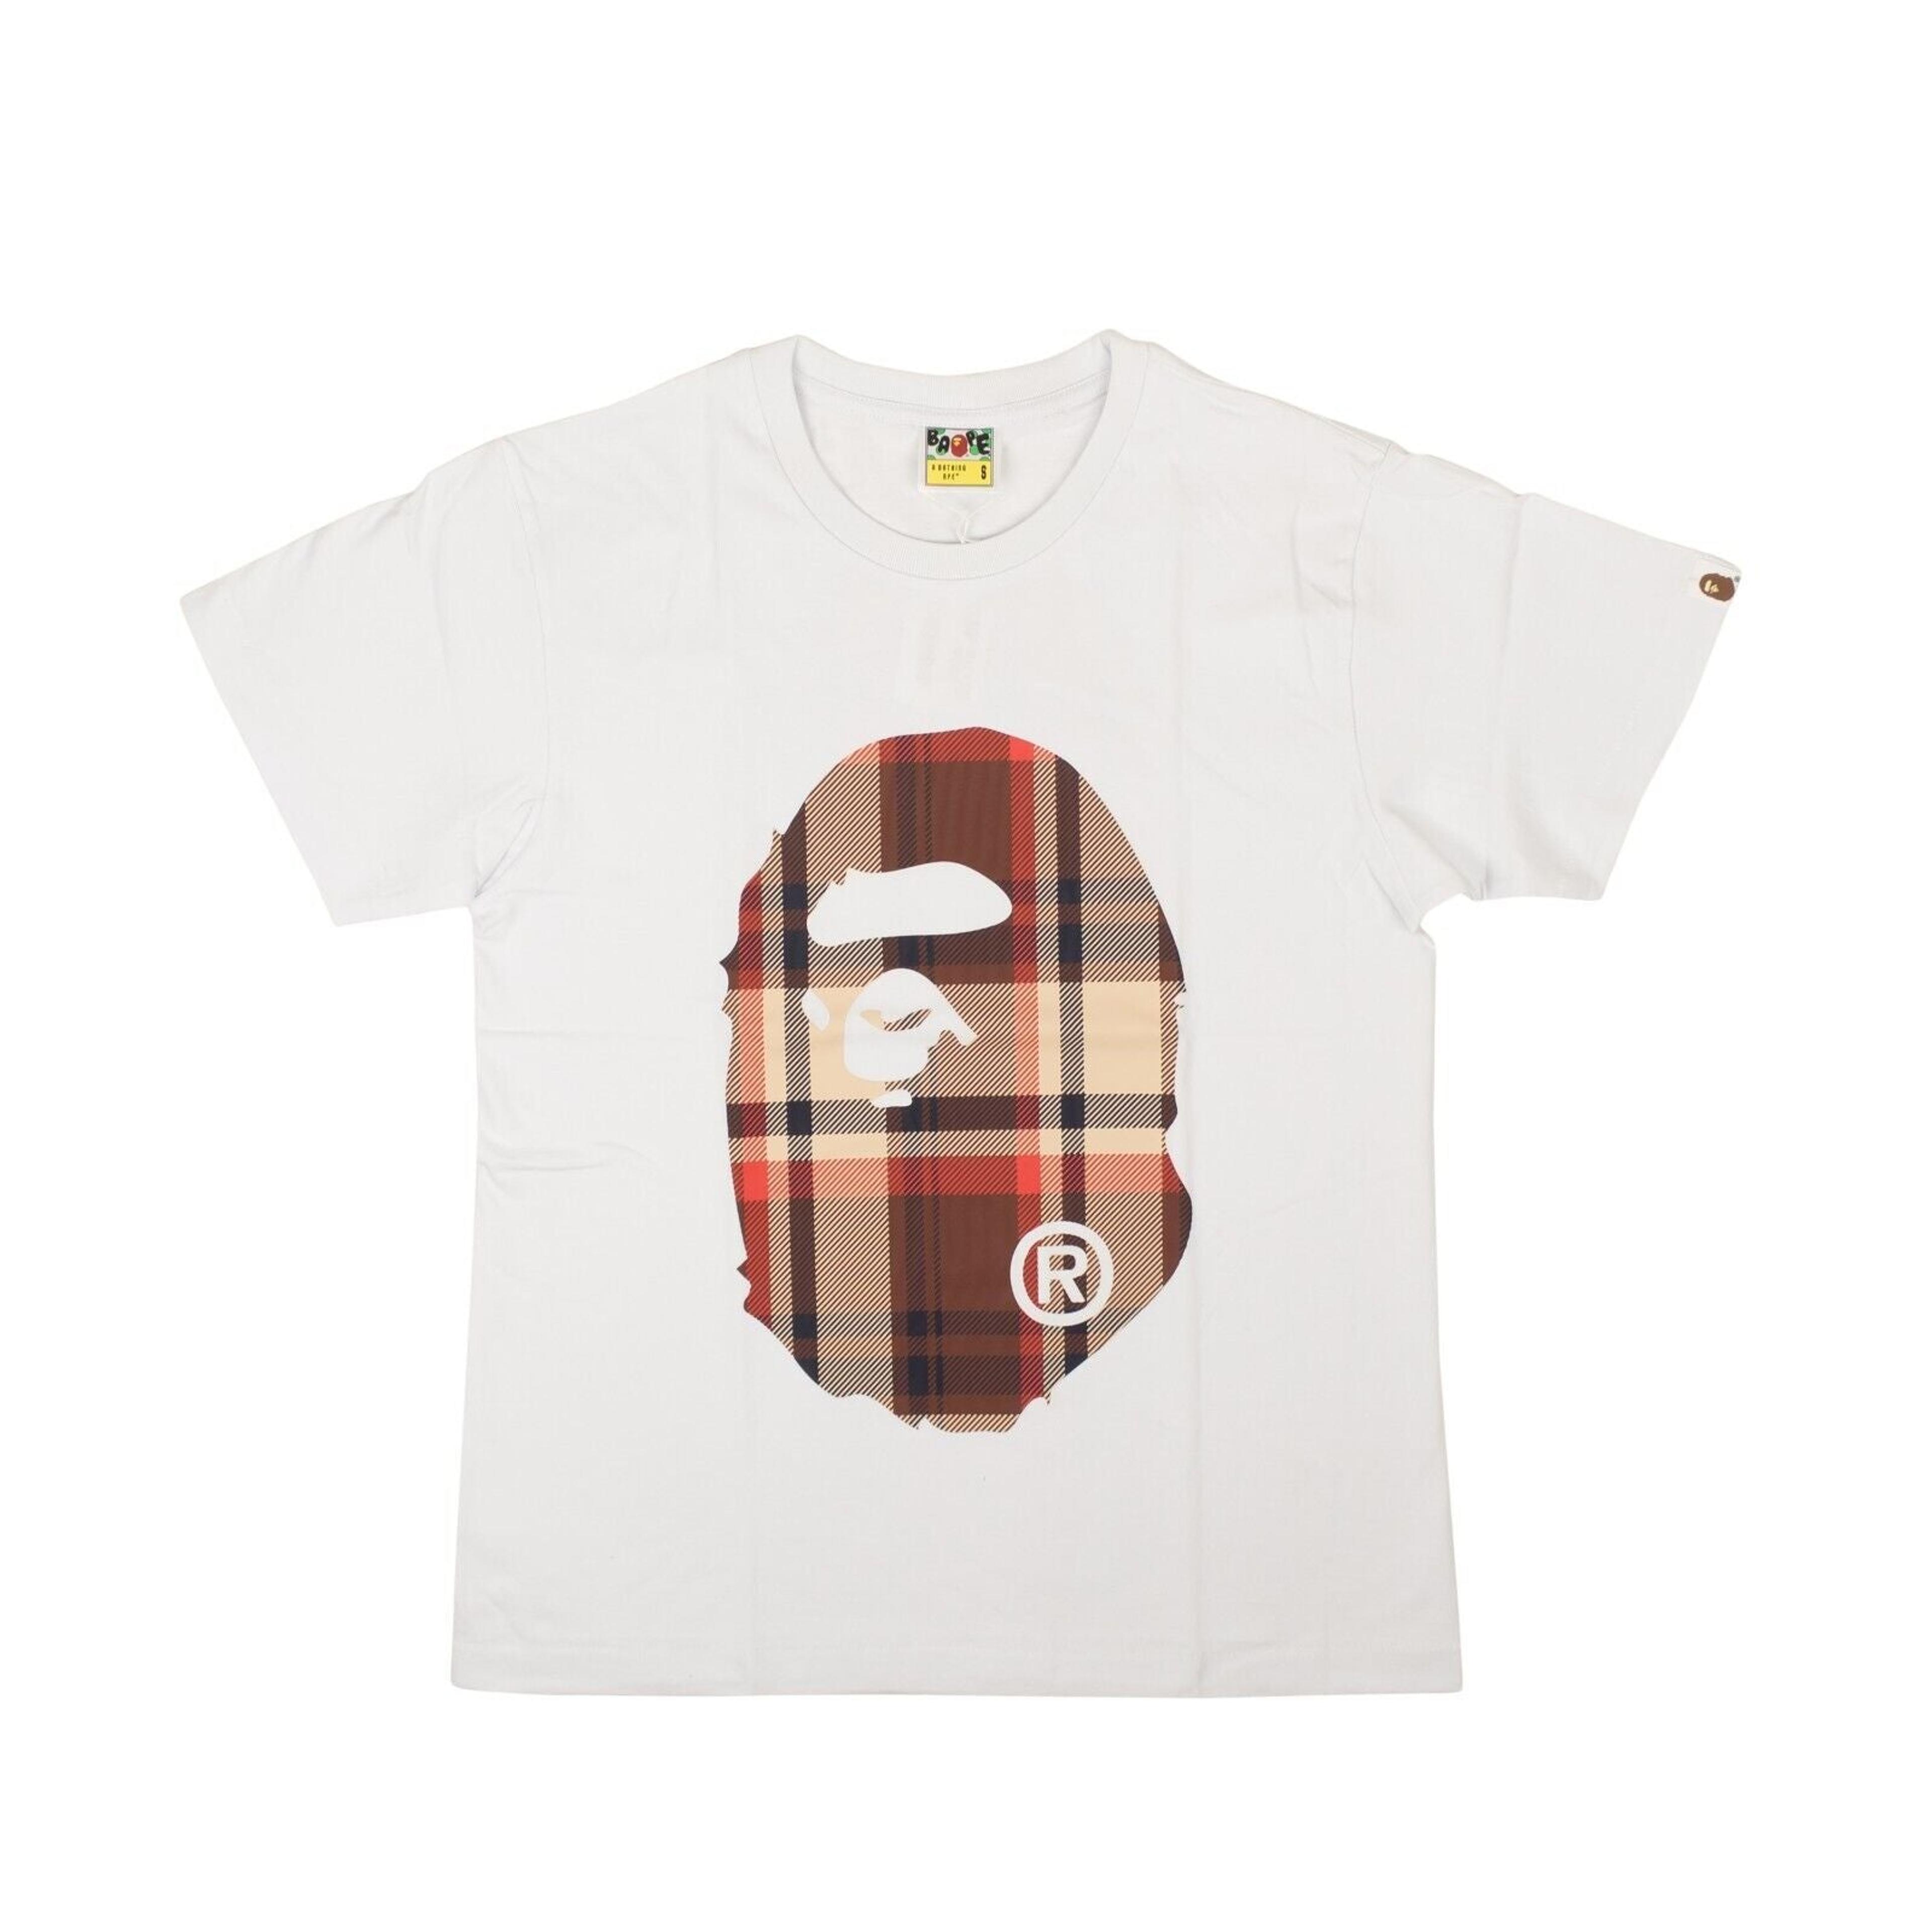 Alternate View 1 of White And Brown Plaid Ape Front Logo Short Sleeve T-Shirt